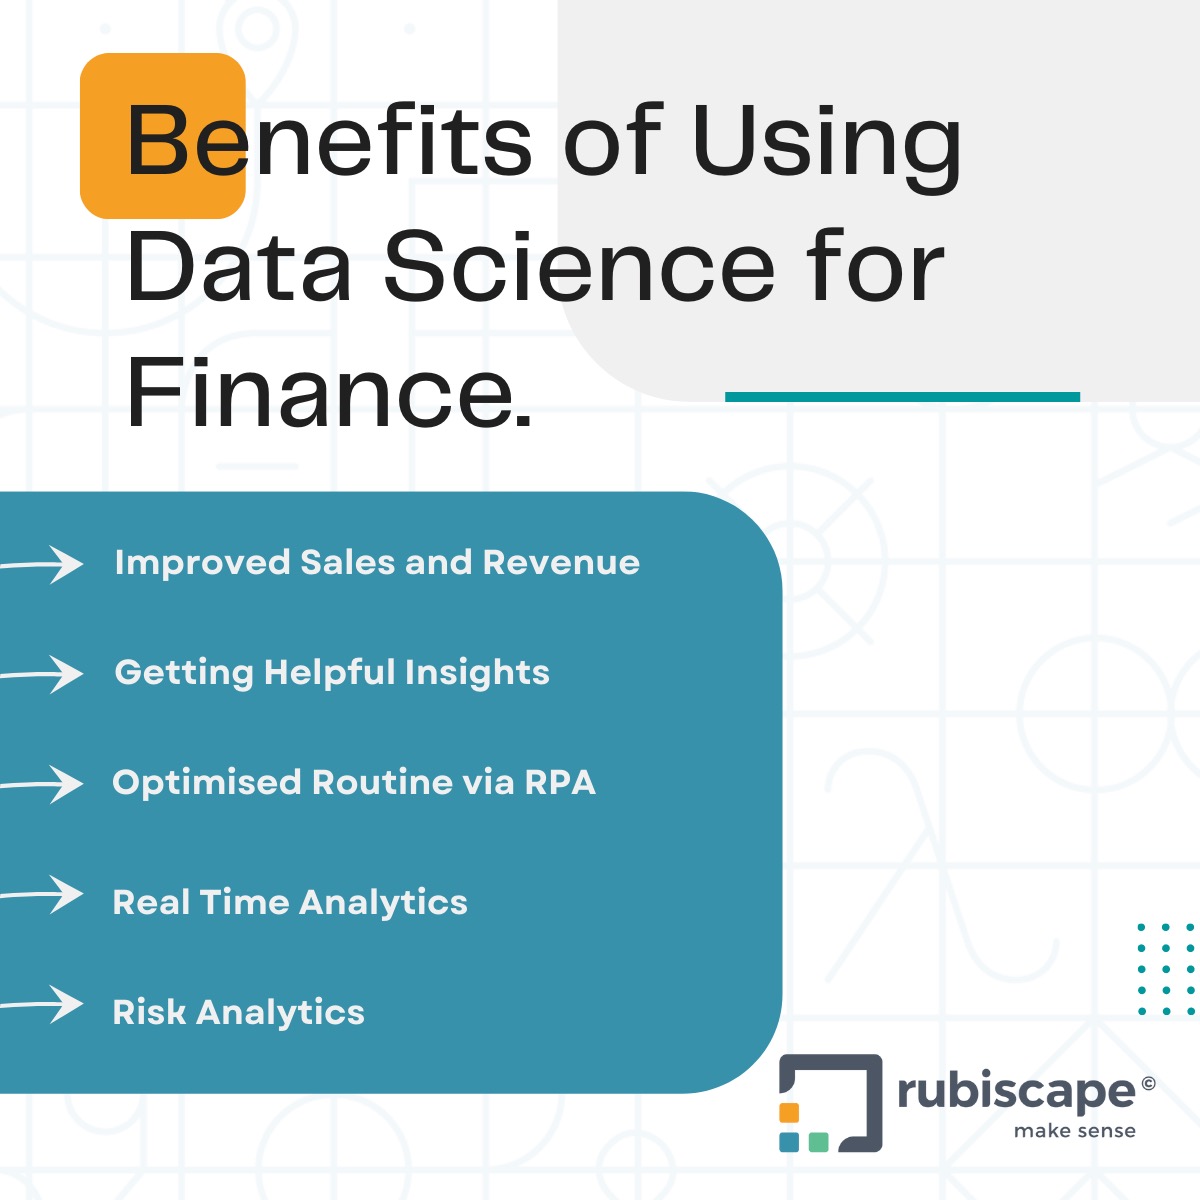 Check out the infographic about the benefits of using #DataScience for #Finance.

#Rubiscape #datanalytics #financeindustry #Machinelearning #datasets